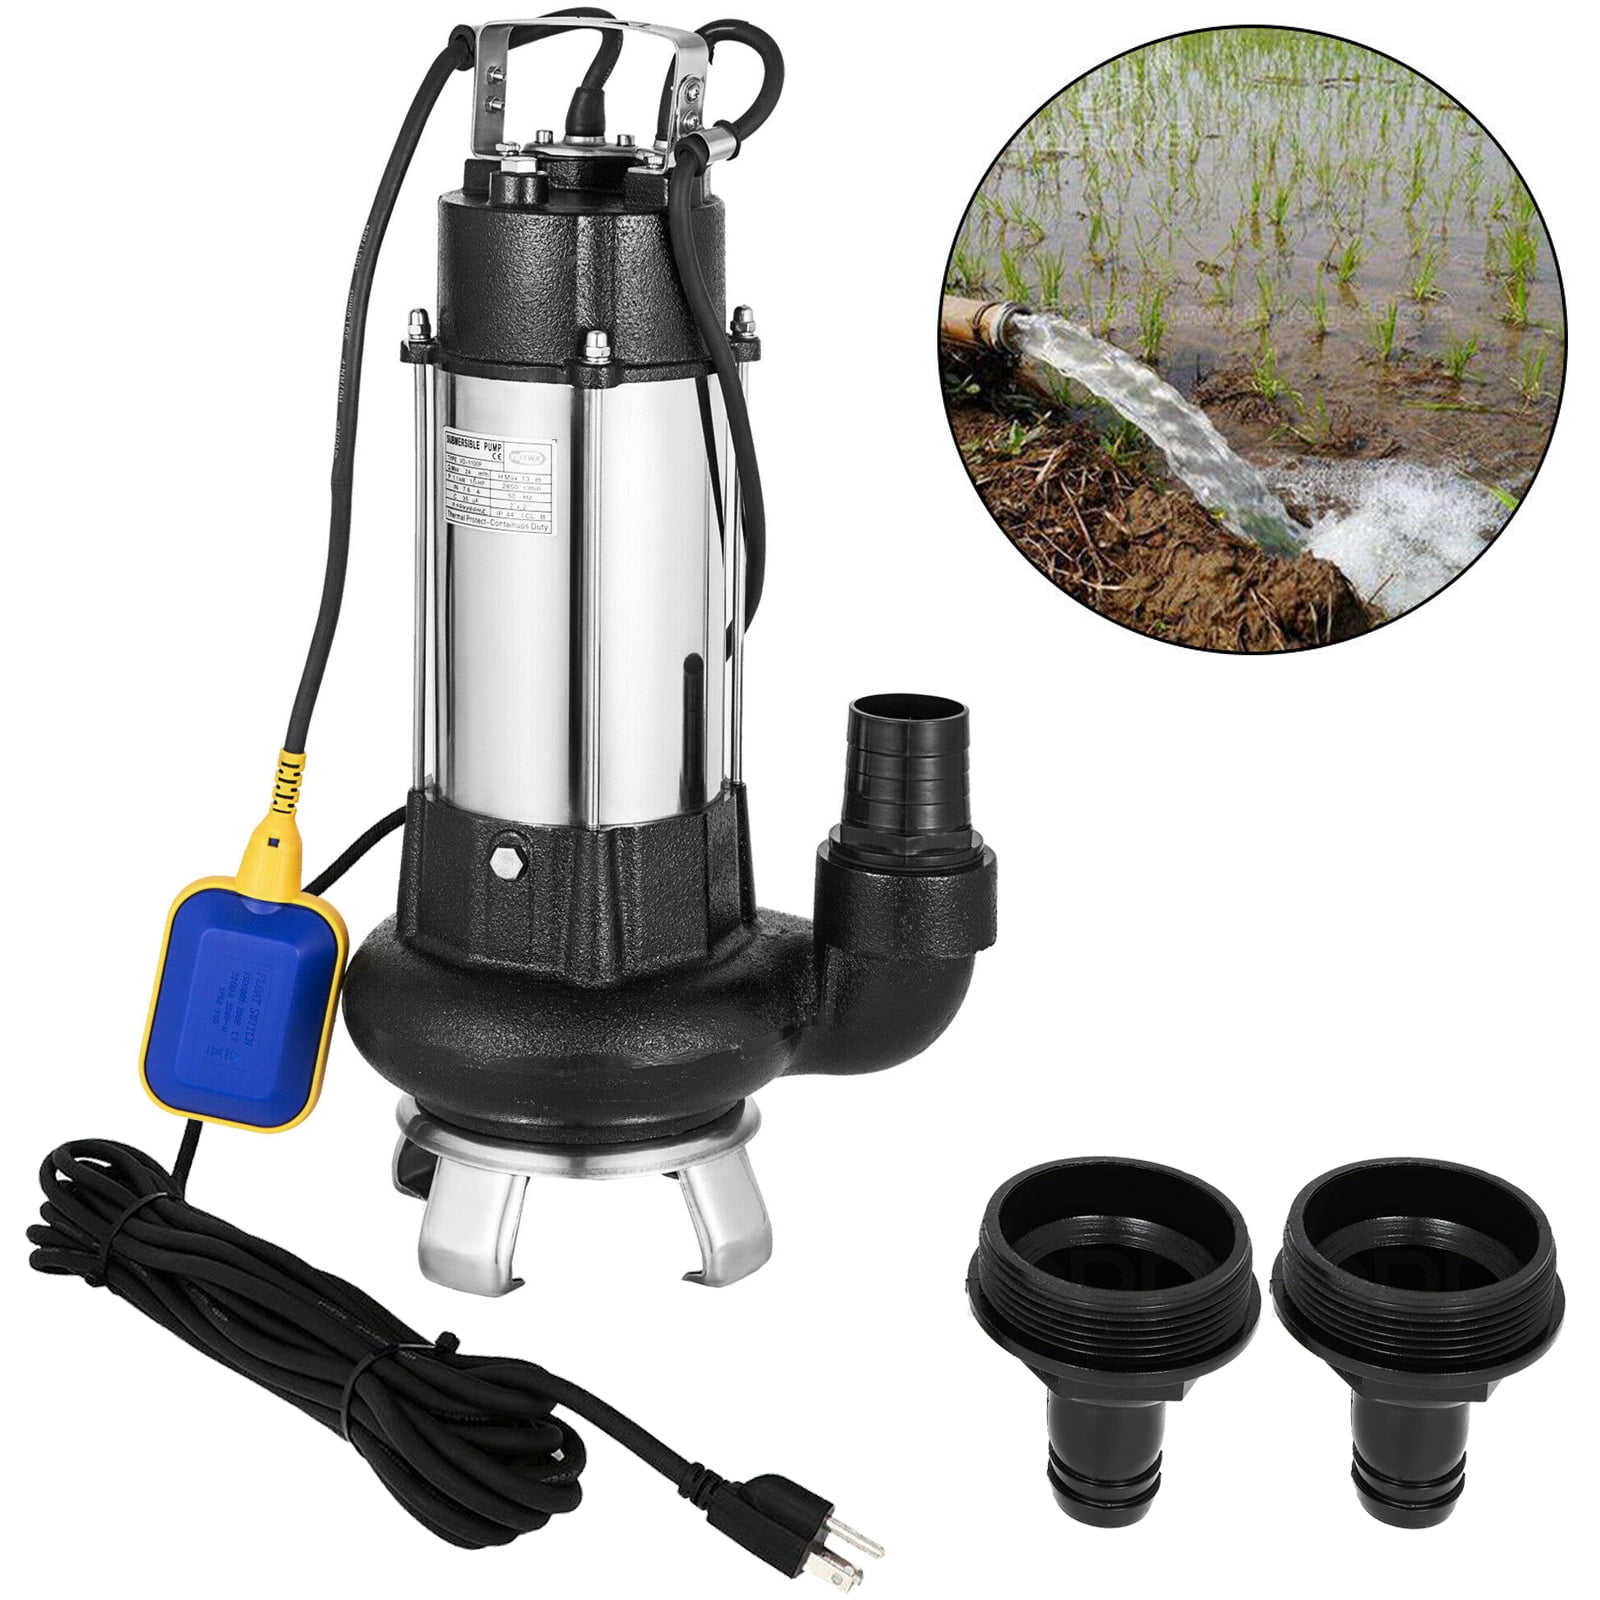 Silver 1.5HP Sump Pump Stainless Steel Submersible Pump 1100W 4356GPH Water Pump with 3 Outlets & Float Switch for Residential/Commercial Irrigating Draining 